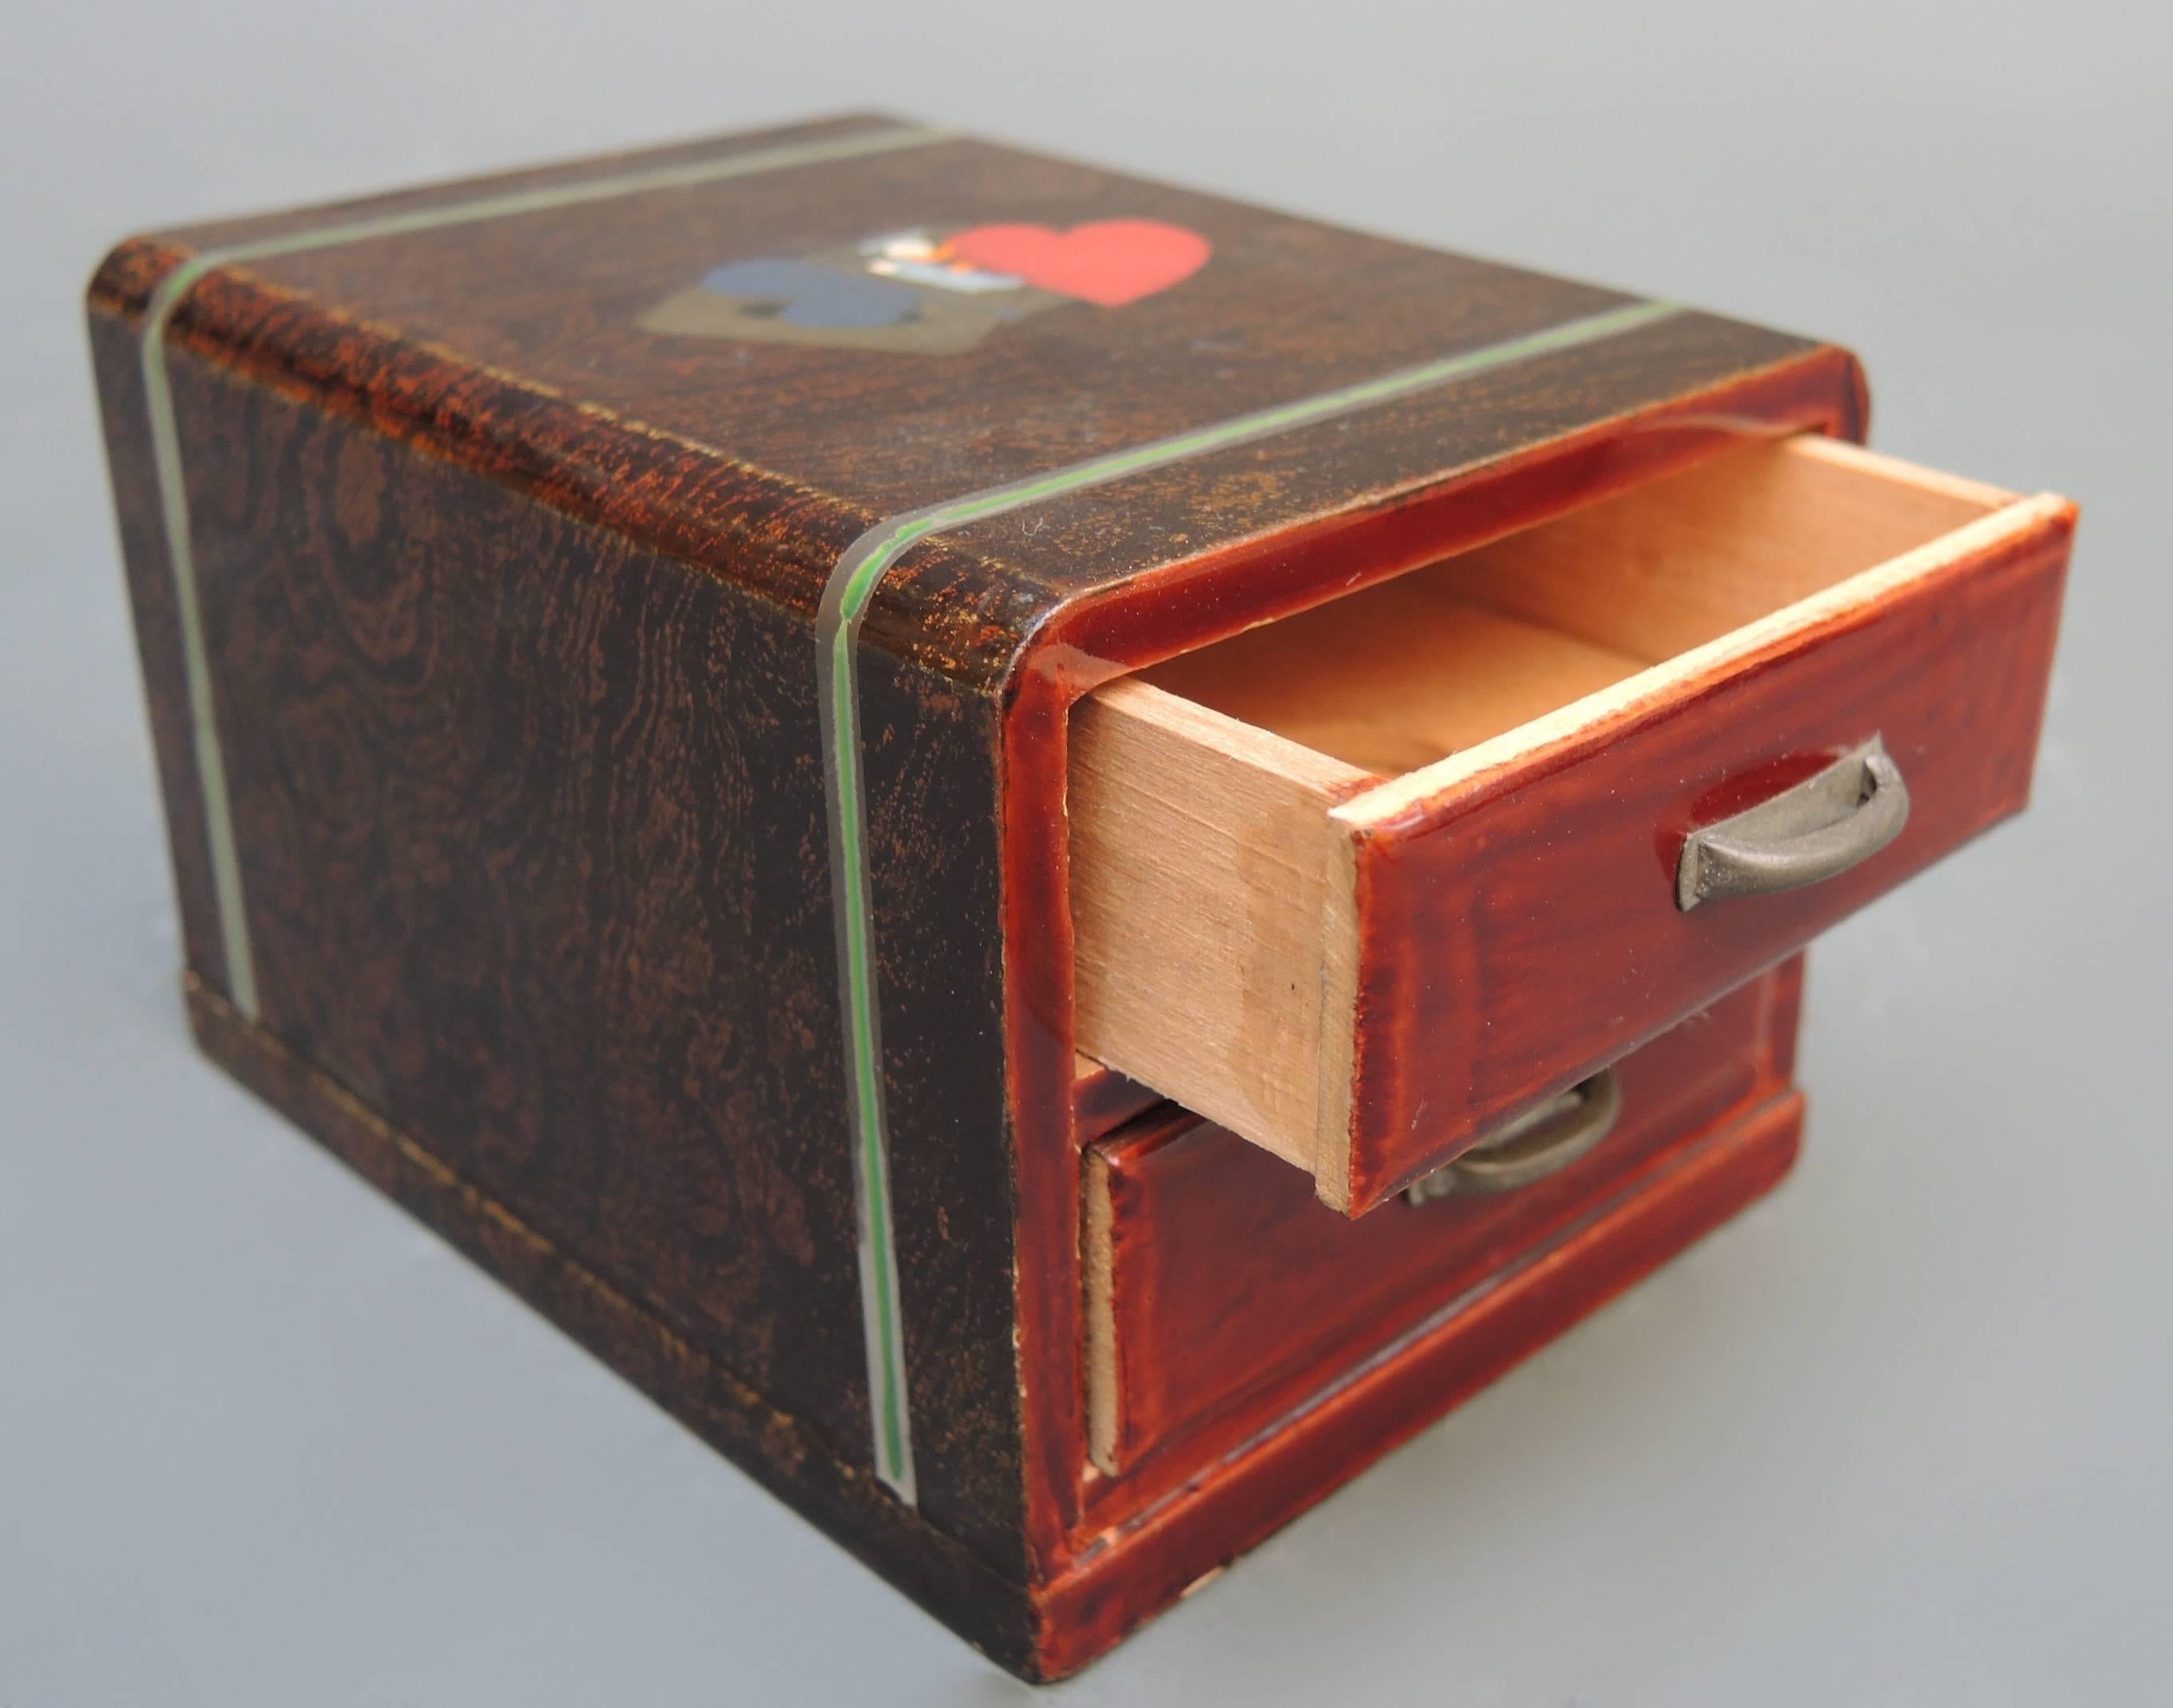 Japanese lacquered wood playing card box with two drawers, circa 1940. An elegant gift for your bridge playing friends and for that fun host and /Hostess!